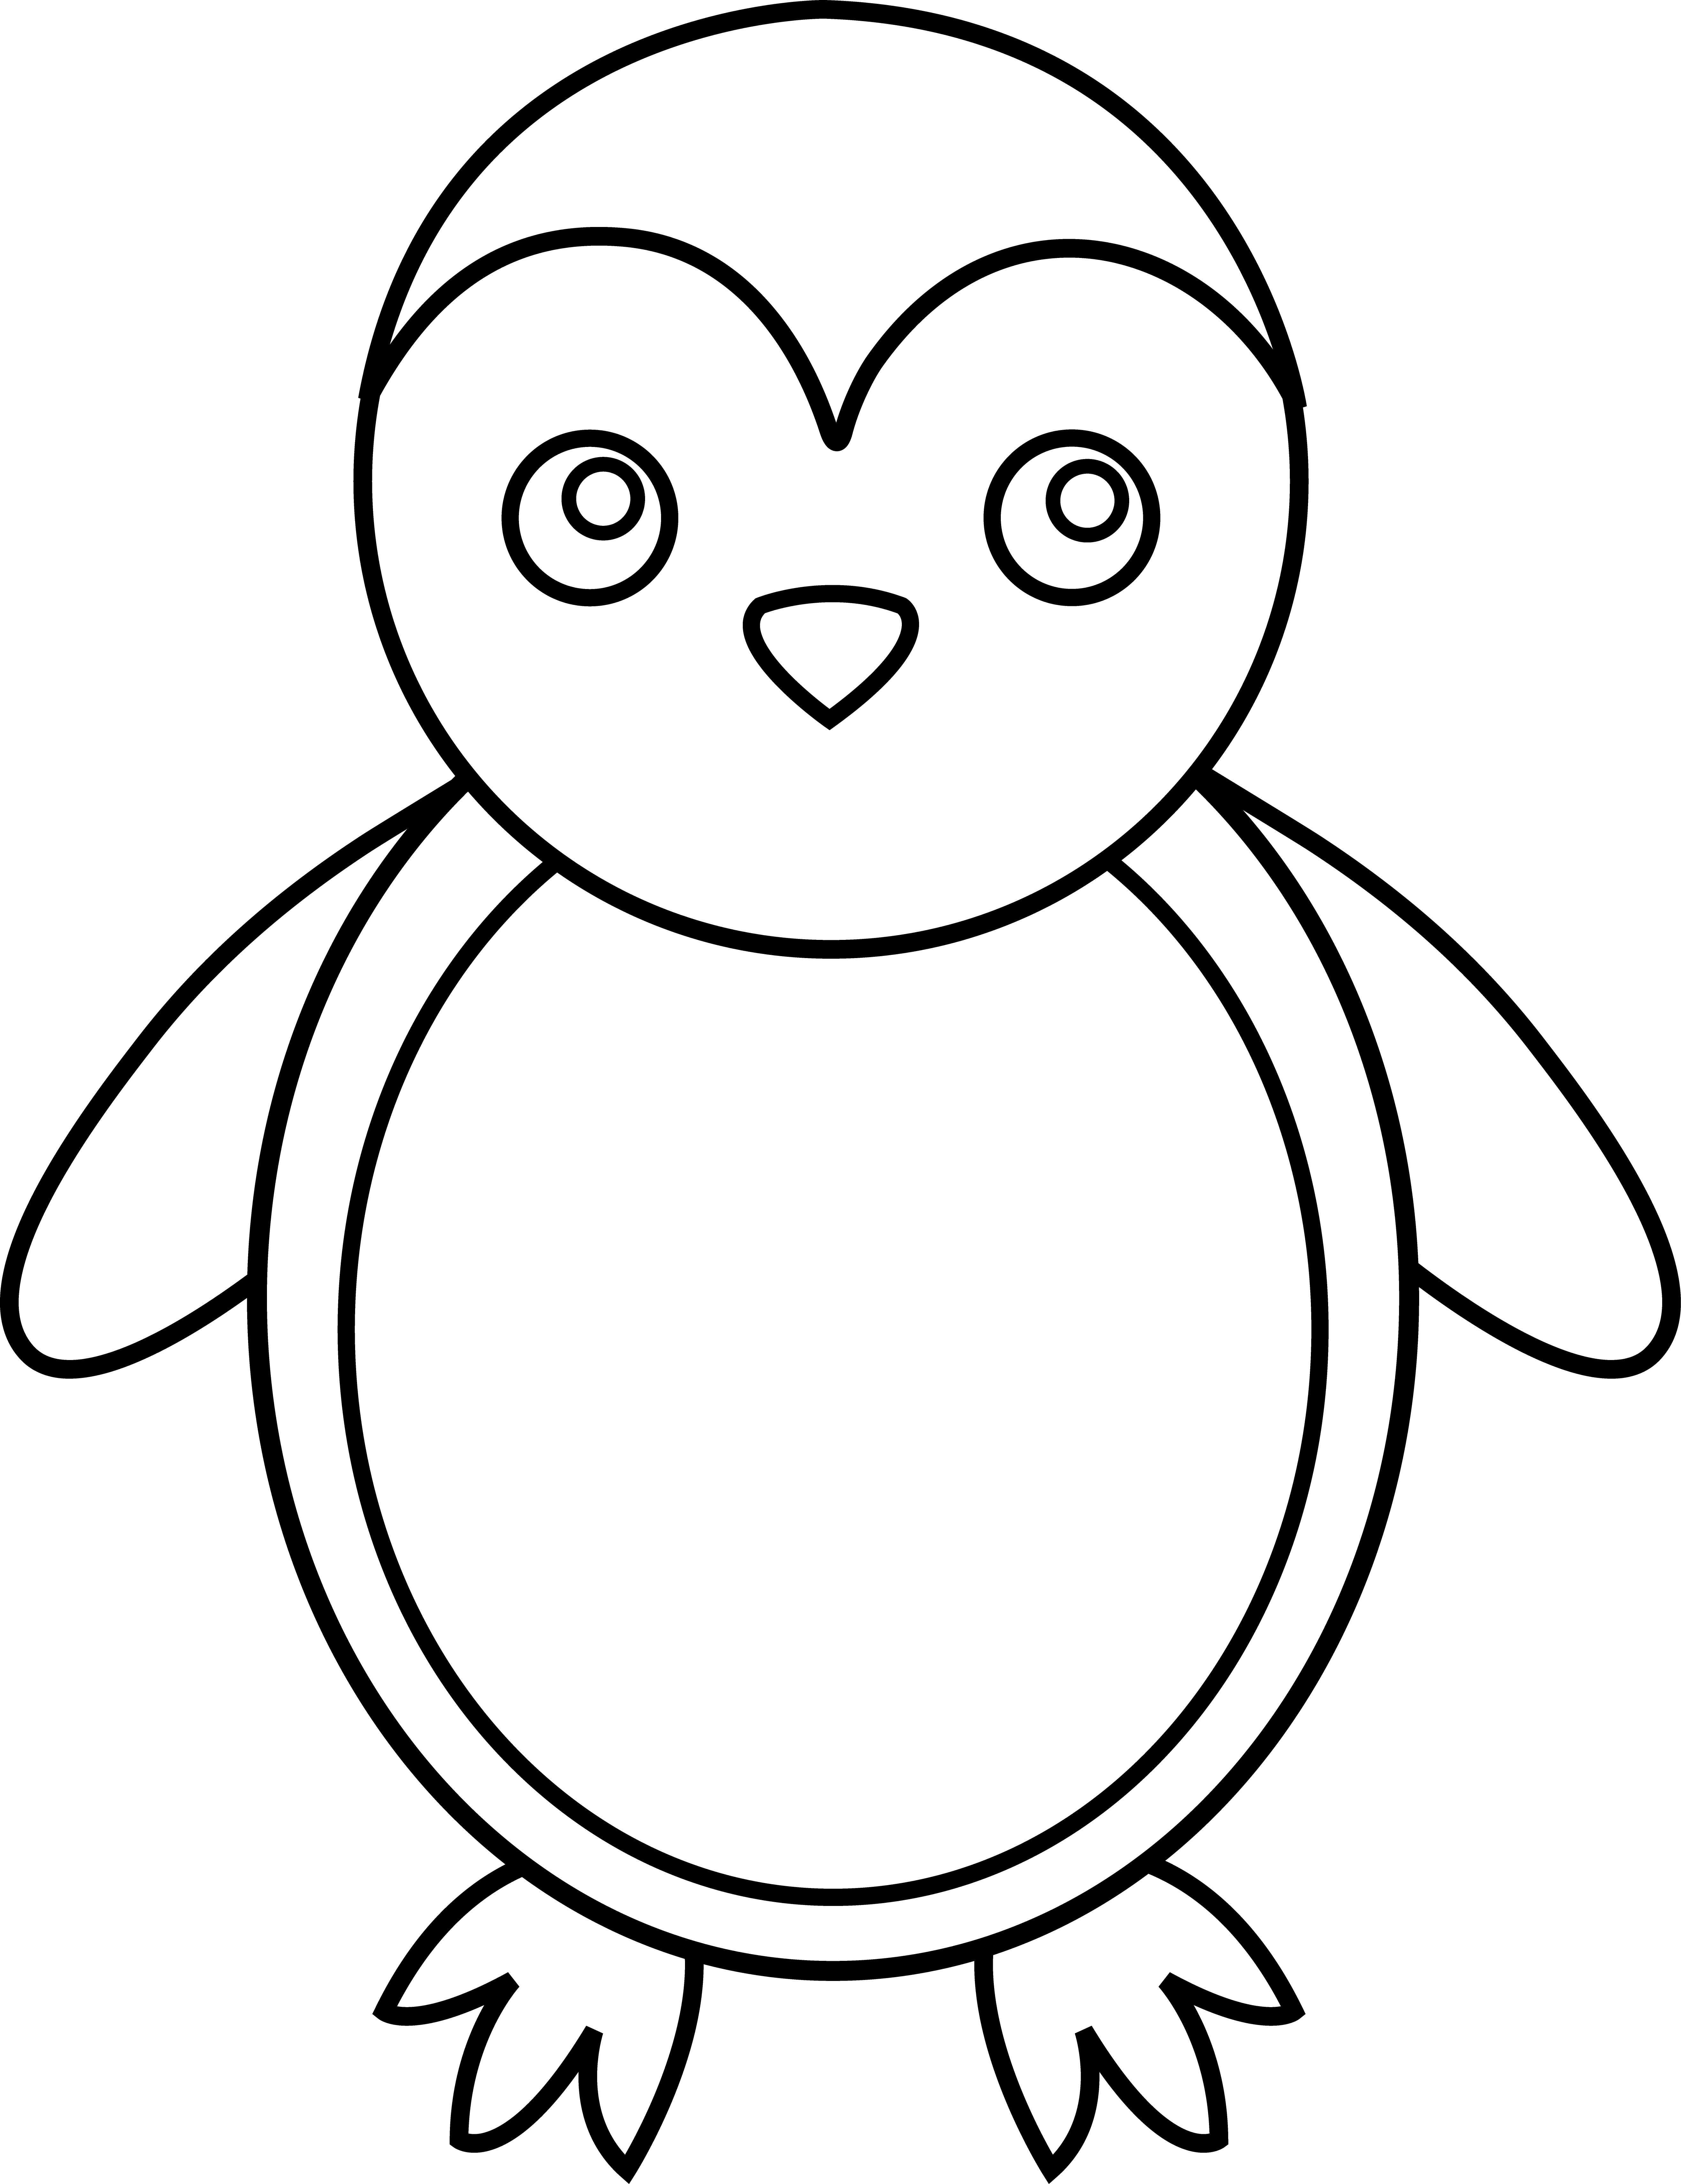 Cute penguin clipart black and white